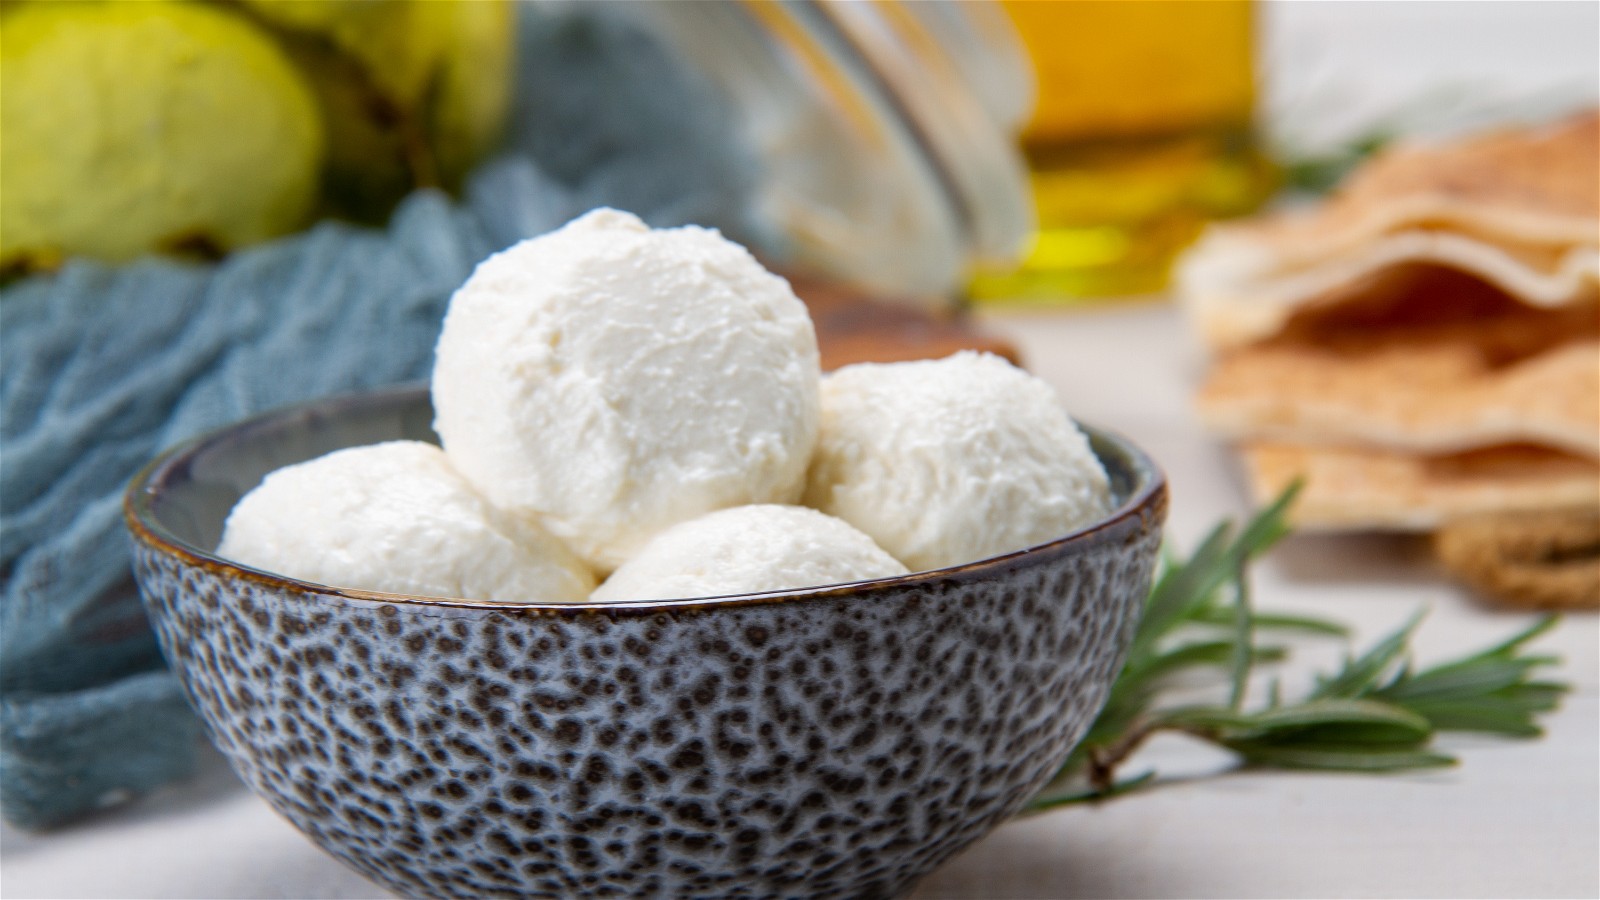 Image of Labneh